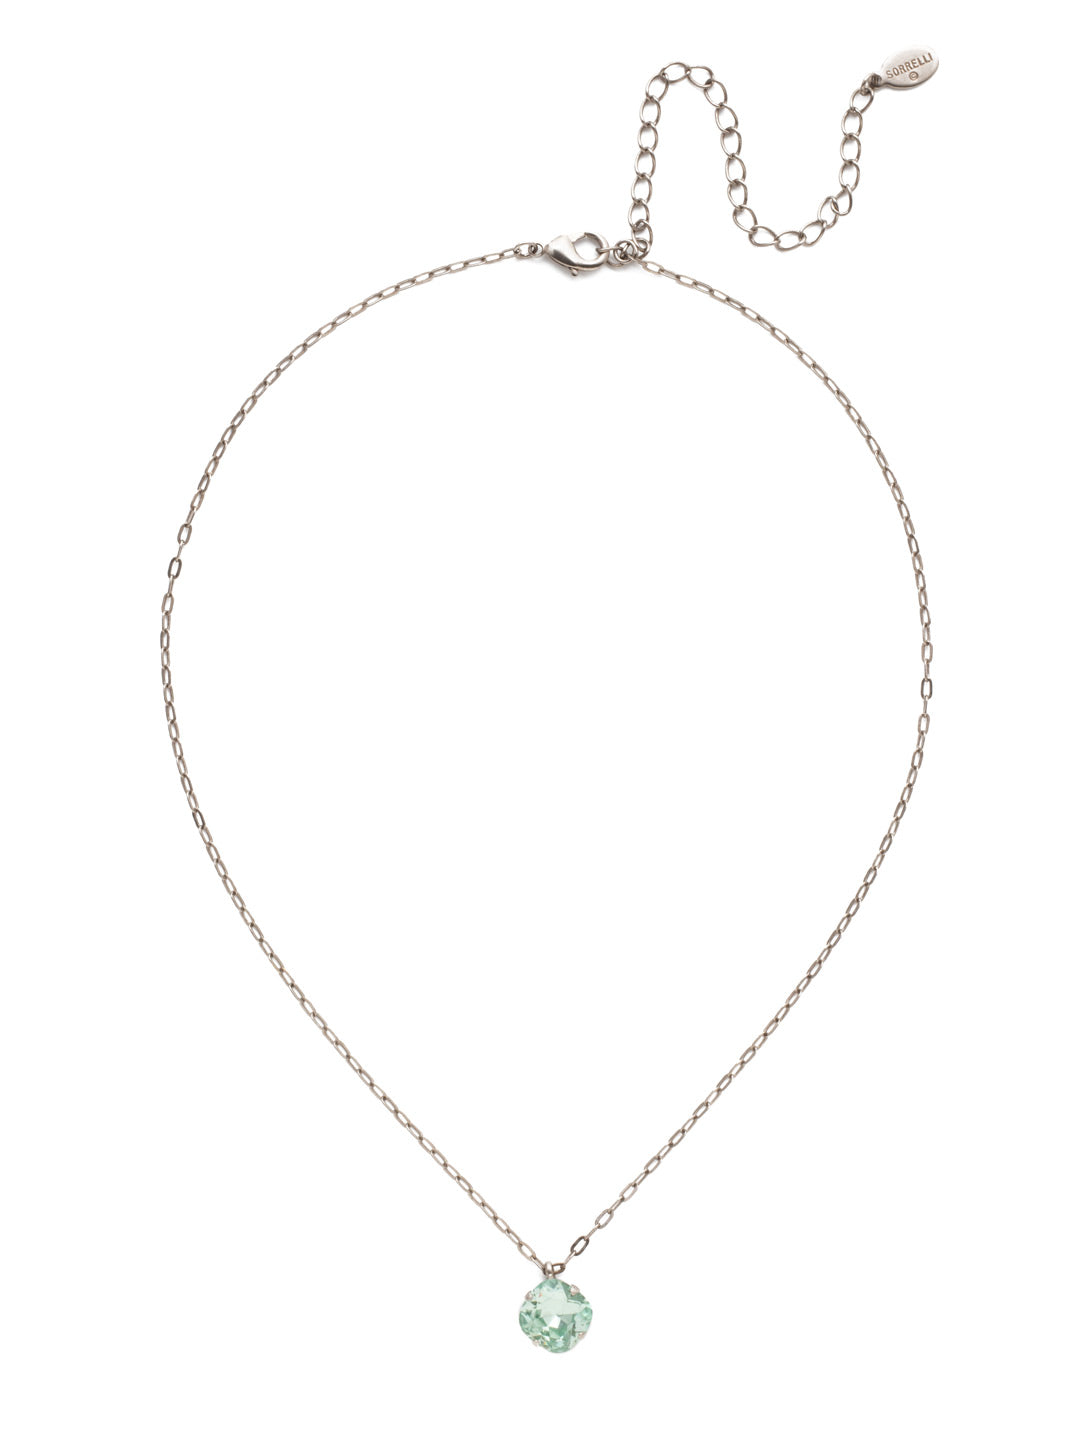 Siren Pendant Necklace - NEP22ASMIN - With a cushion-cut crystal and delicate chain, the Siren Pendant  will add a litle sparkle to your everyday look. From Sorrelli's Mint collection in our Antique Silver-tone finish.